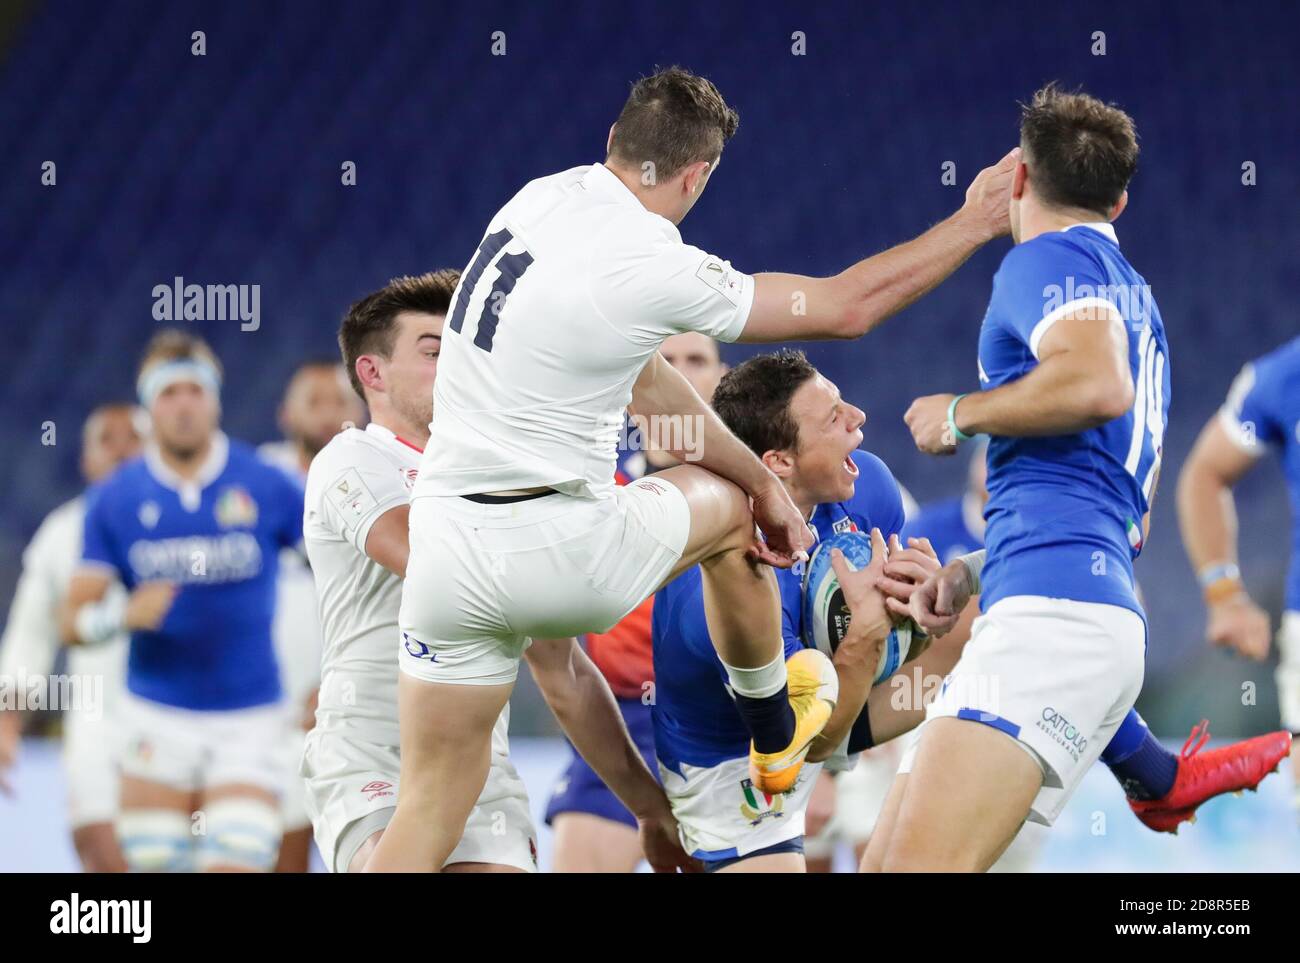 Rome, Italy. 31st Oct, 2020. rome, Italy, Stadio Olimpico, 31 Oct 2020, Paolo Garbisi (Italy) during Italy vs England - Rugby Six Nations match - Credit: LM/Luigi Mariani Credit: Luigi Mariani/LPS/ZUMA Wire/Alamy Live News Stock Photo